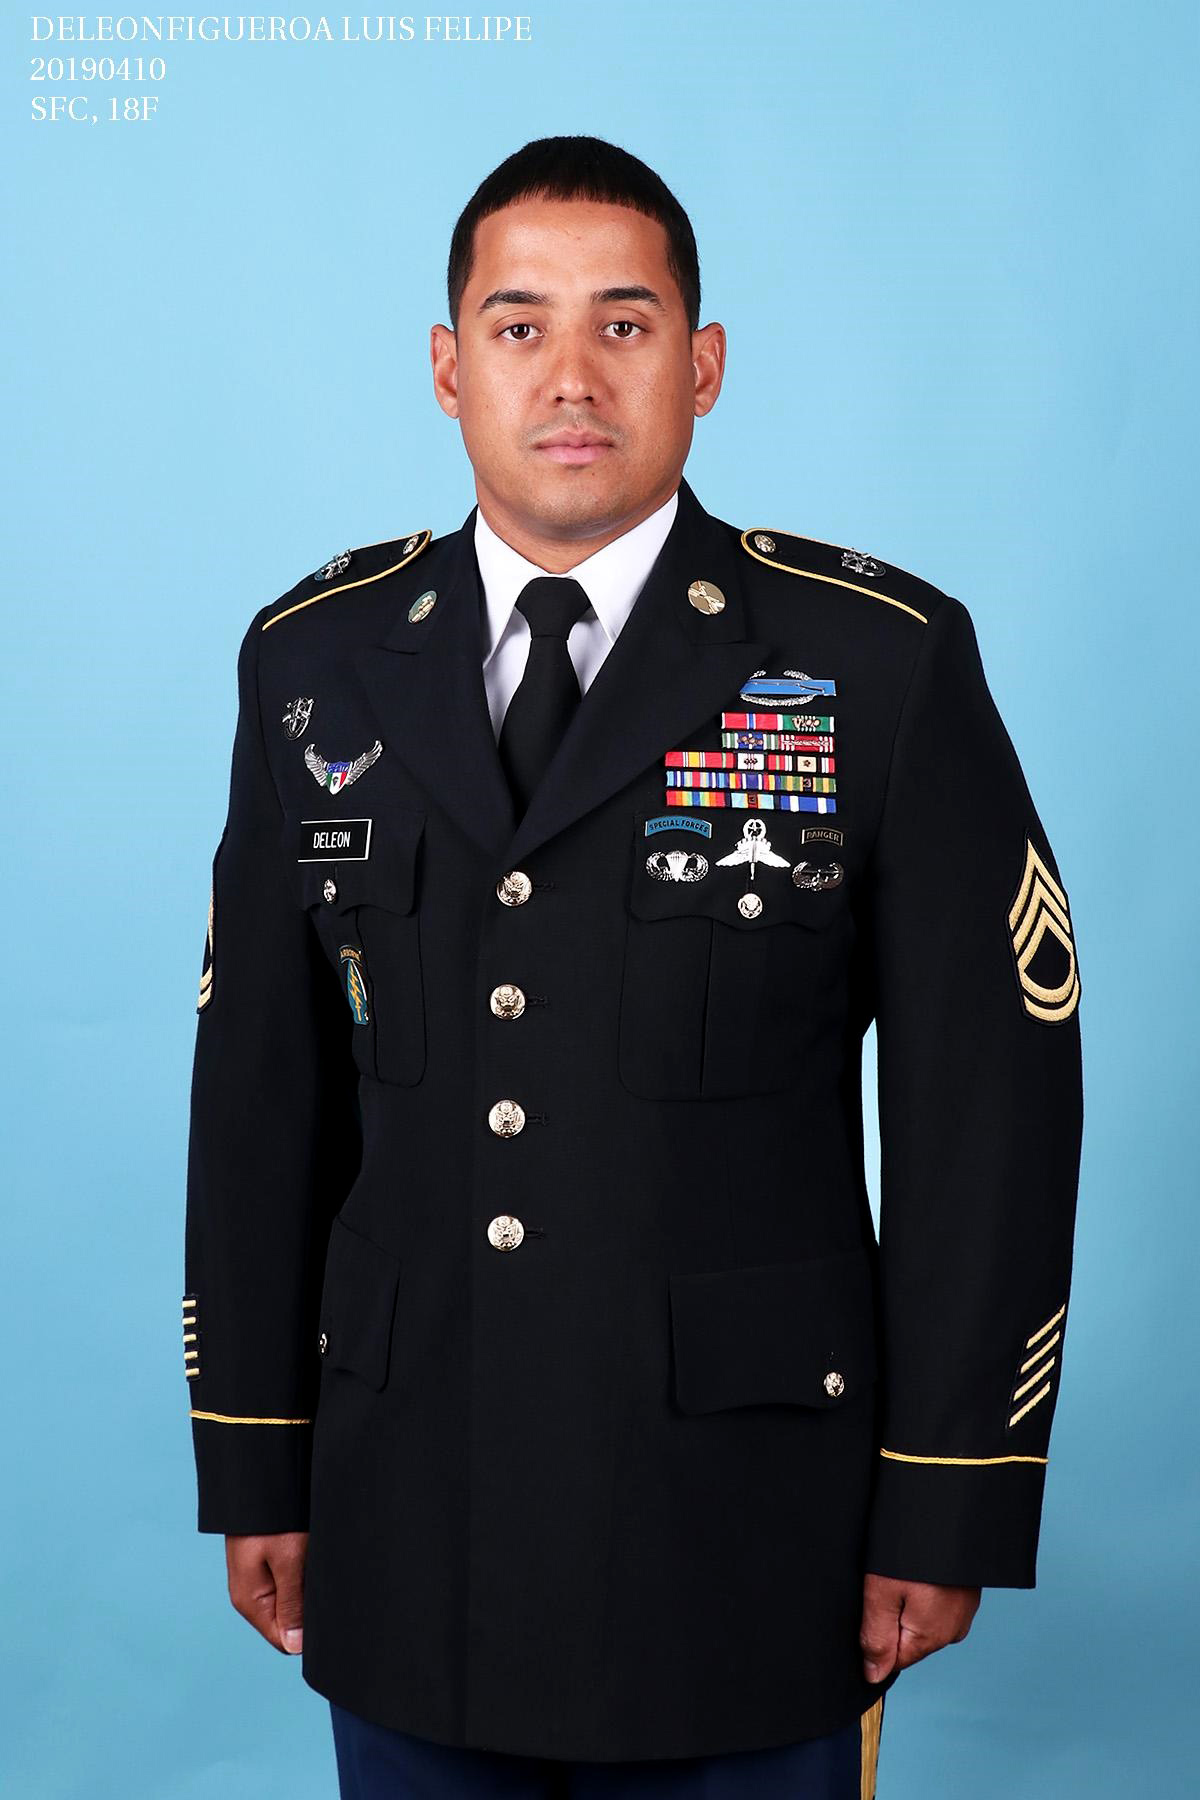 PHOTO: Master Sgt. Luis F. Deleon-Figueroa, 31, of the 7th Special Forces Group (Airborne) was killed Aug. 21, during combat operations in Faryab Province, Afghanistan.